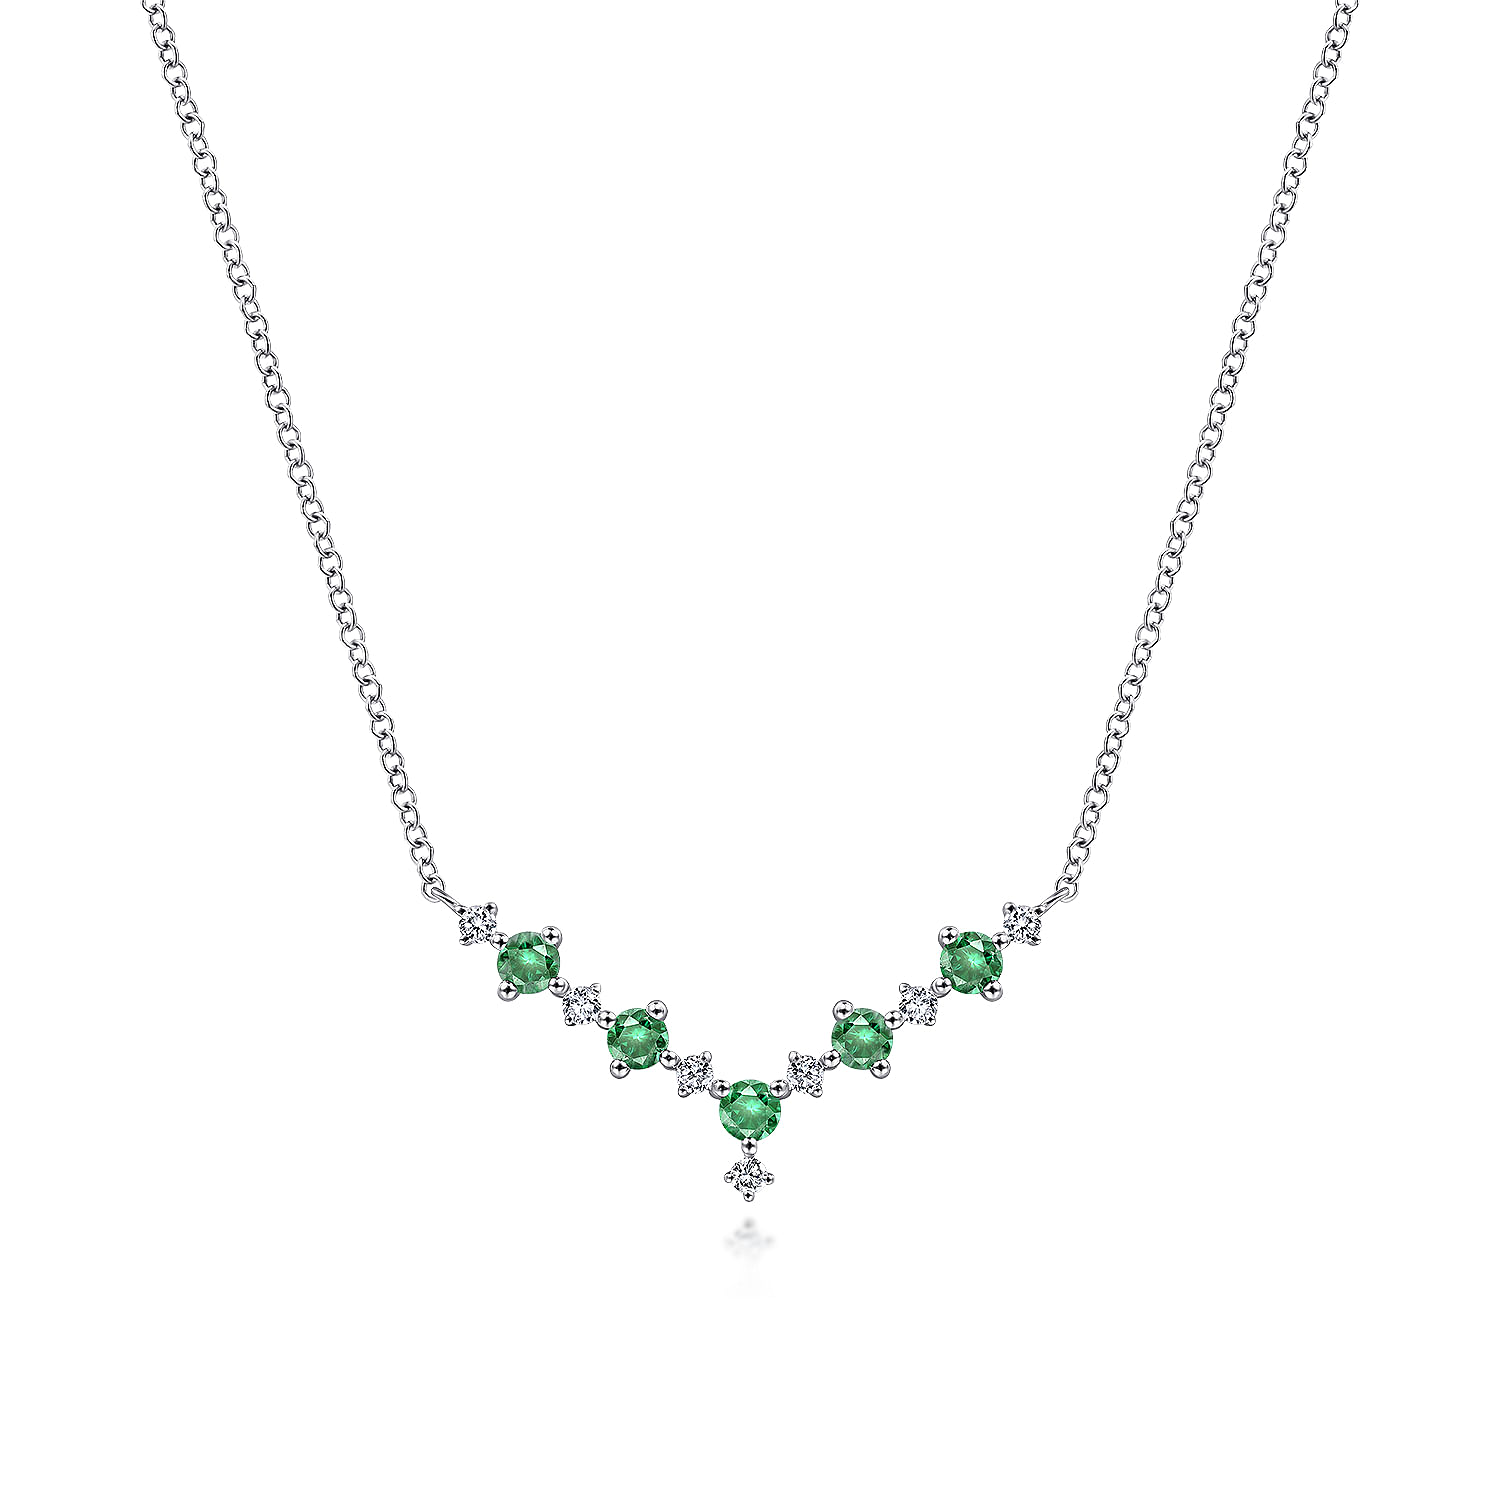 14K White Gold Diamond and Emerald Curved Bar Necklace